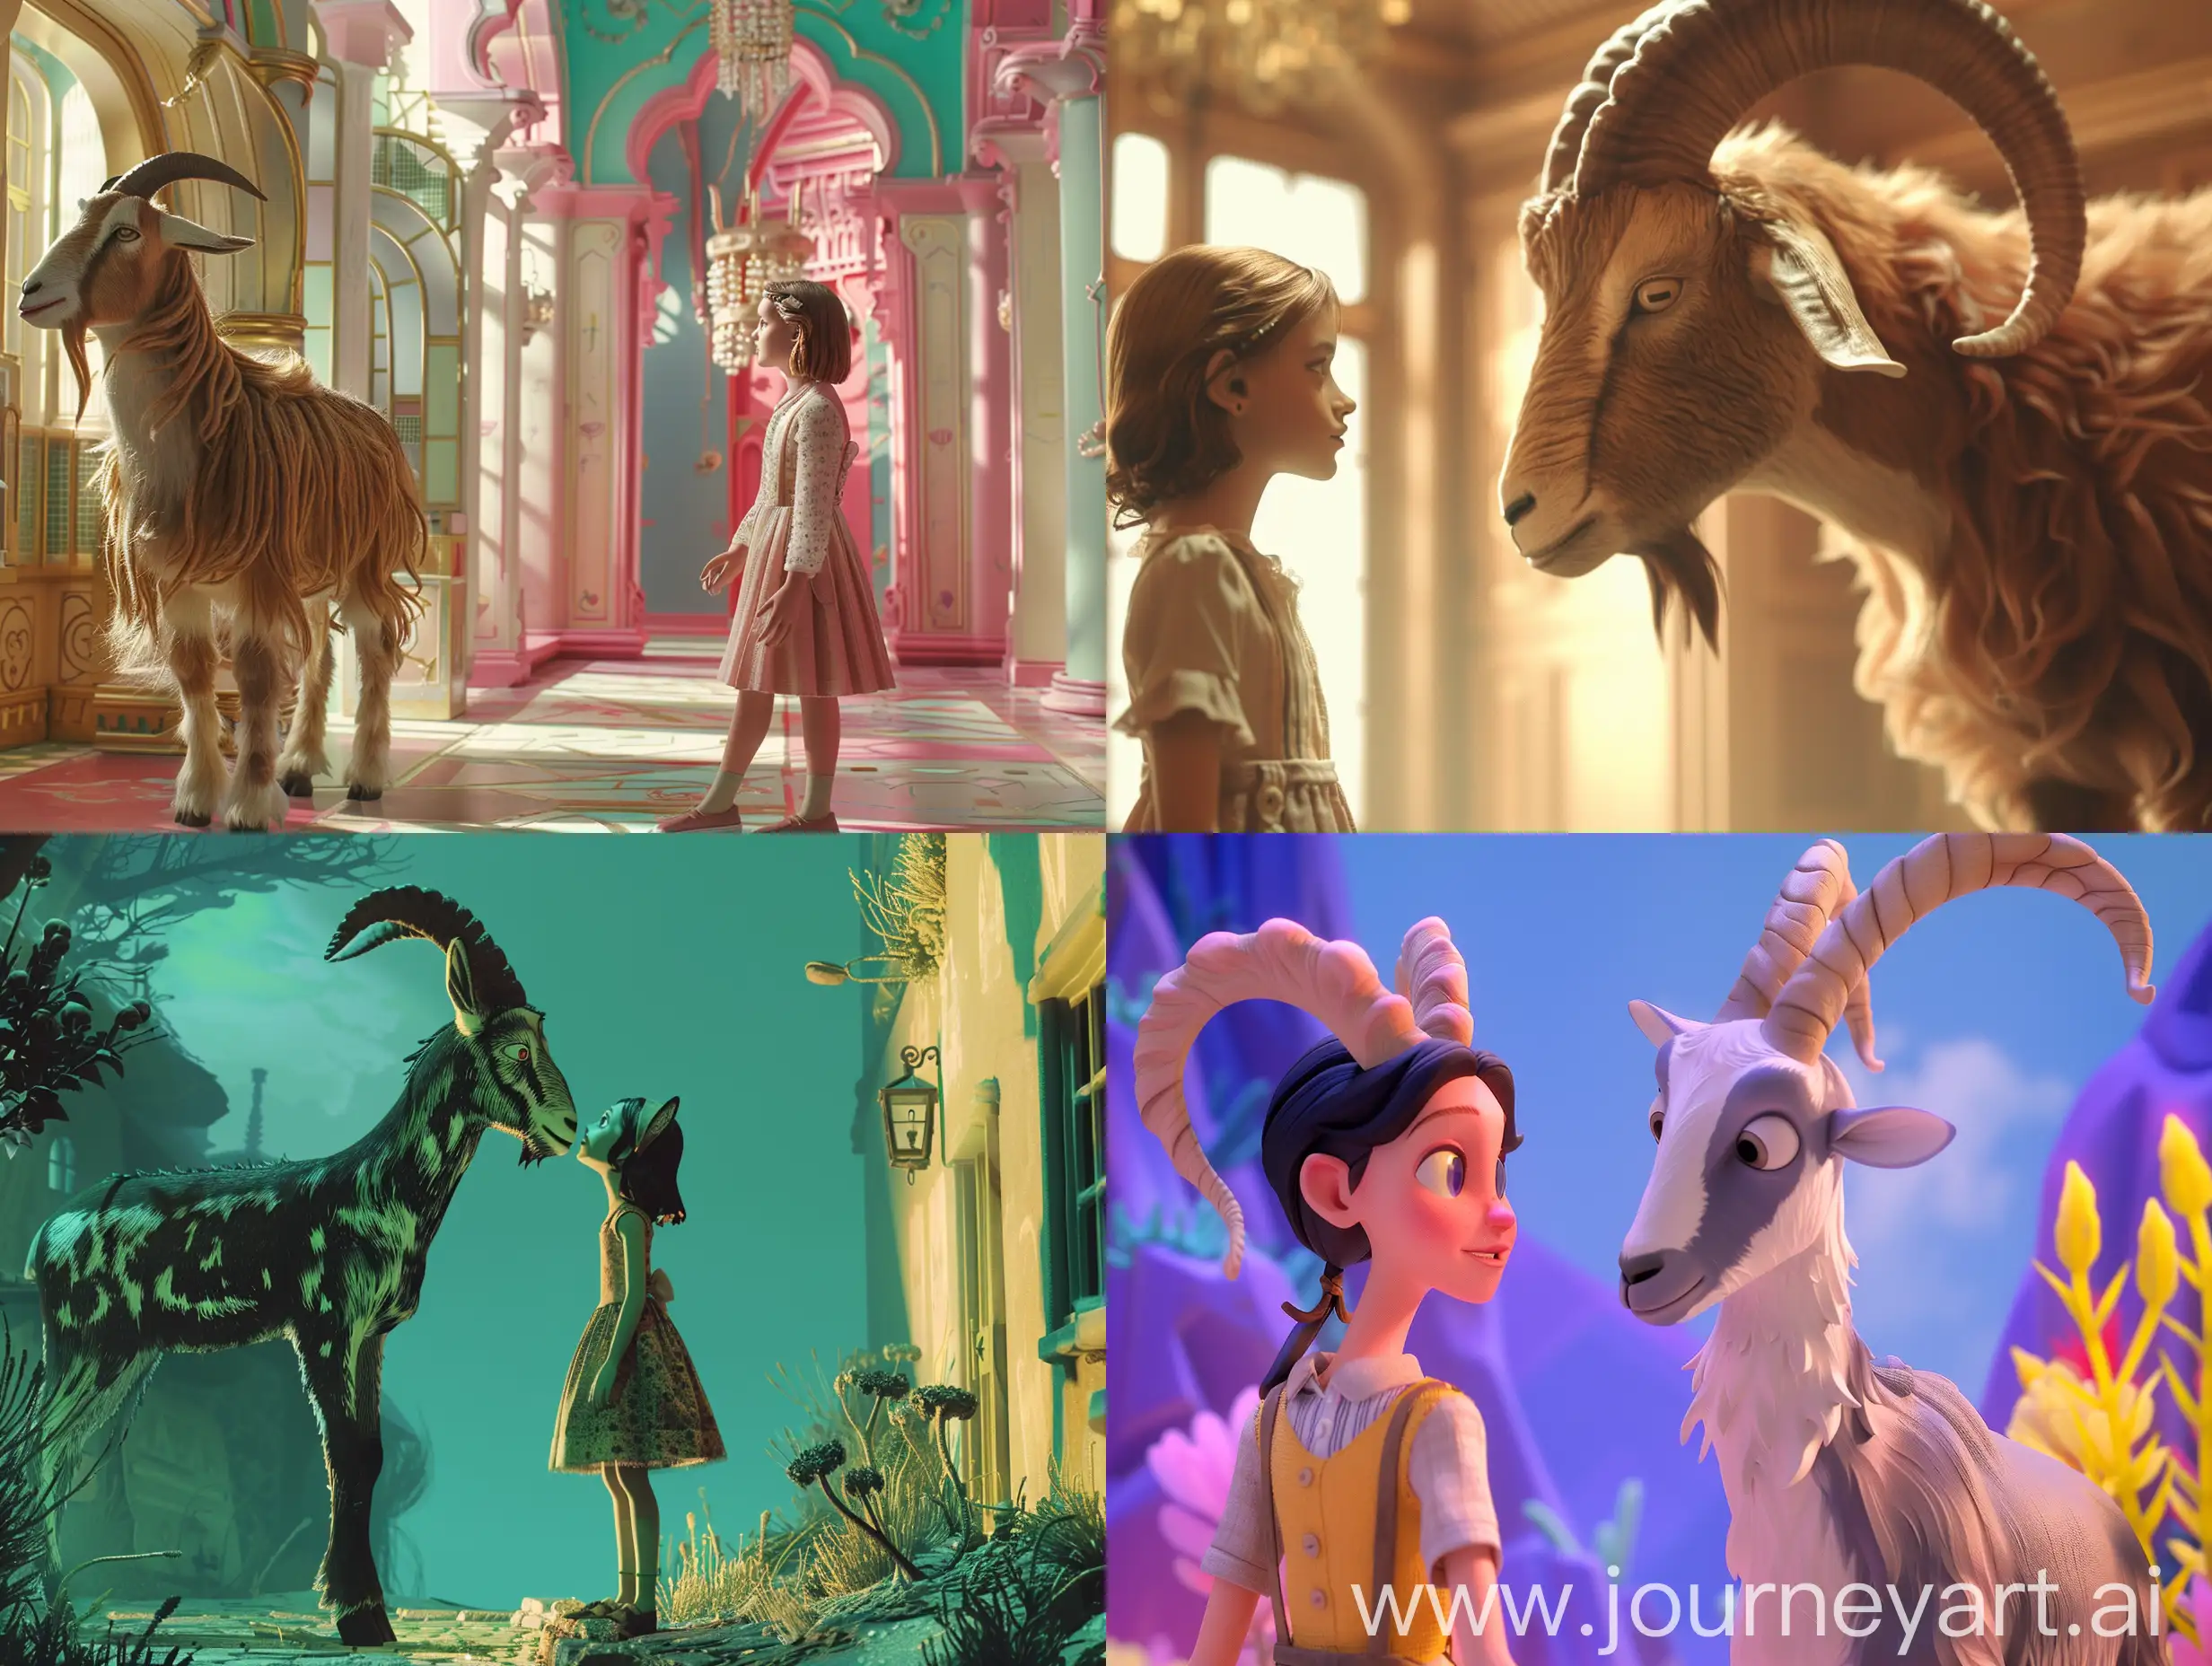 Craft an enchanting dreamworld scene for Midjourney, portraying a whimsical tale of love between a girl and an anthropomorphic goat, using the distinctive Wes Anderson color palette. The focus should be awe-inspiring, leaving viewers in admiration. Integrate strong dramatic elements to enhance the captivating and theatrical effect of the storyline